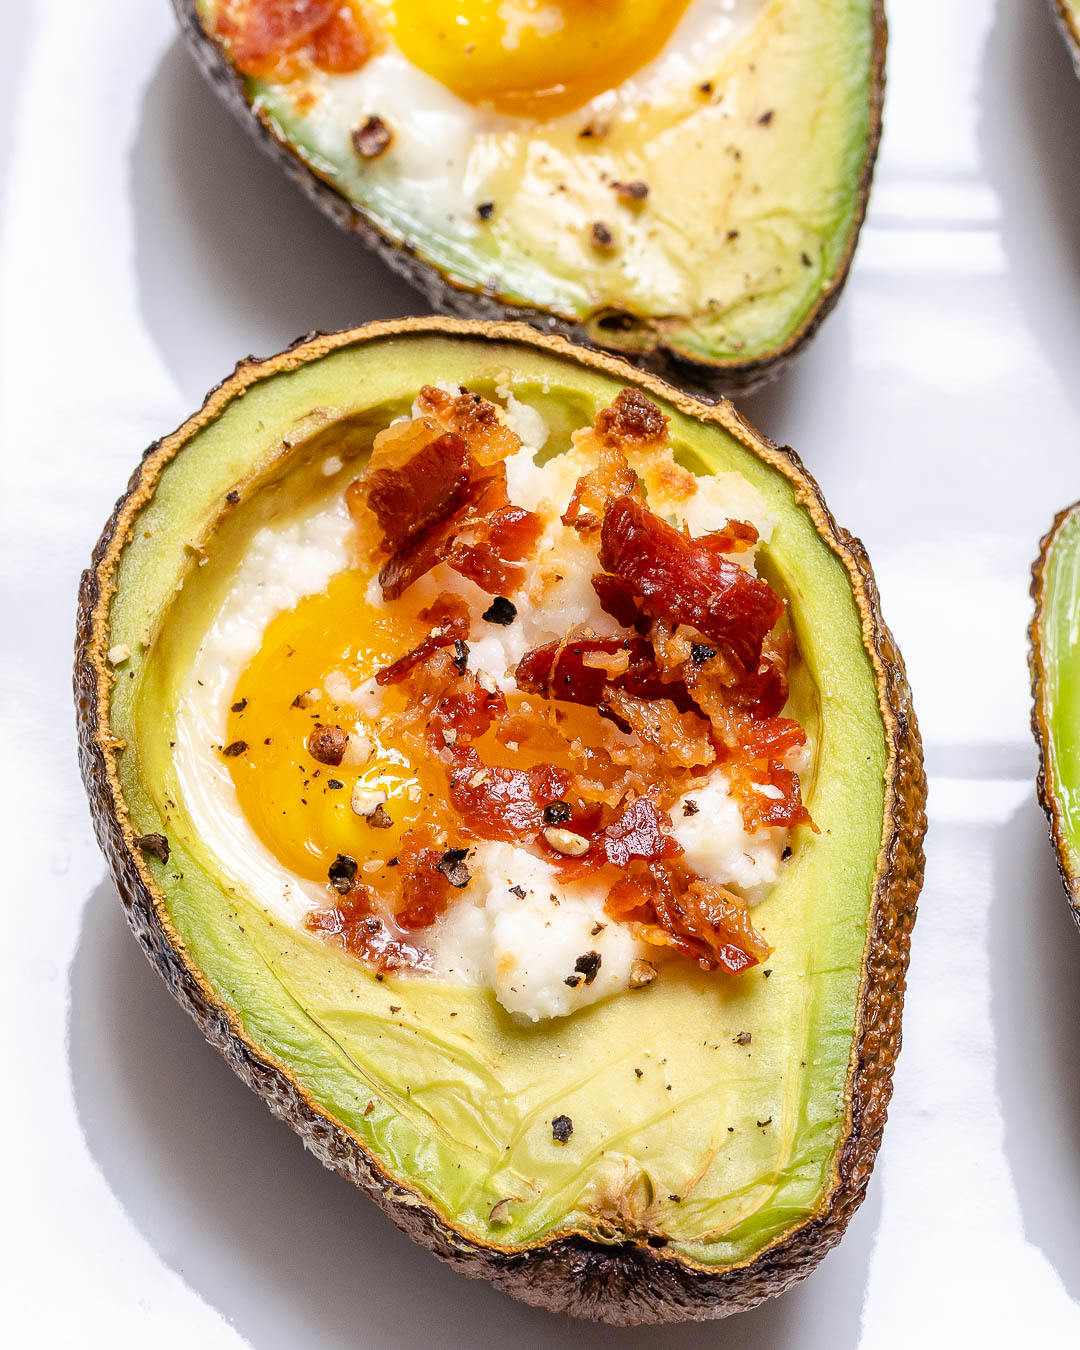 https://cleanfoodcrush.com/wp-content/uploads/2019/06/Breakfast-Avocado-Egg-Cups-with-Bacon.jpg